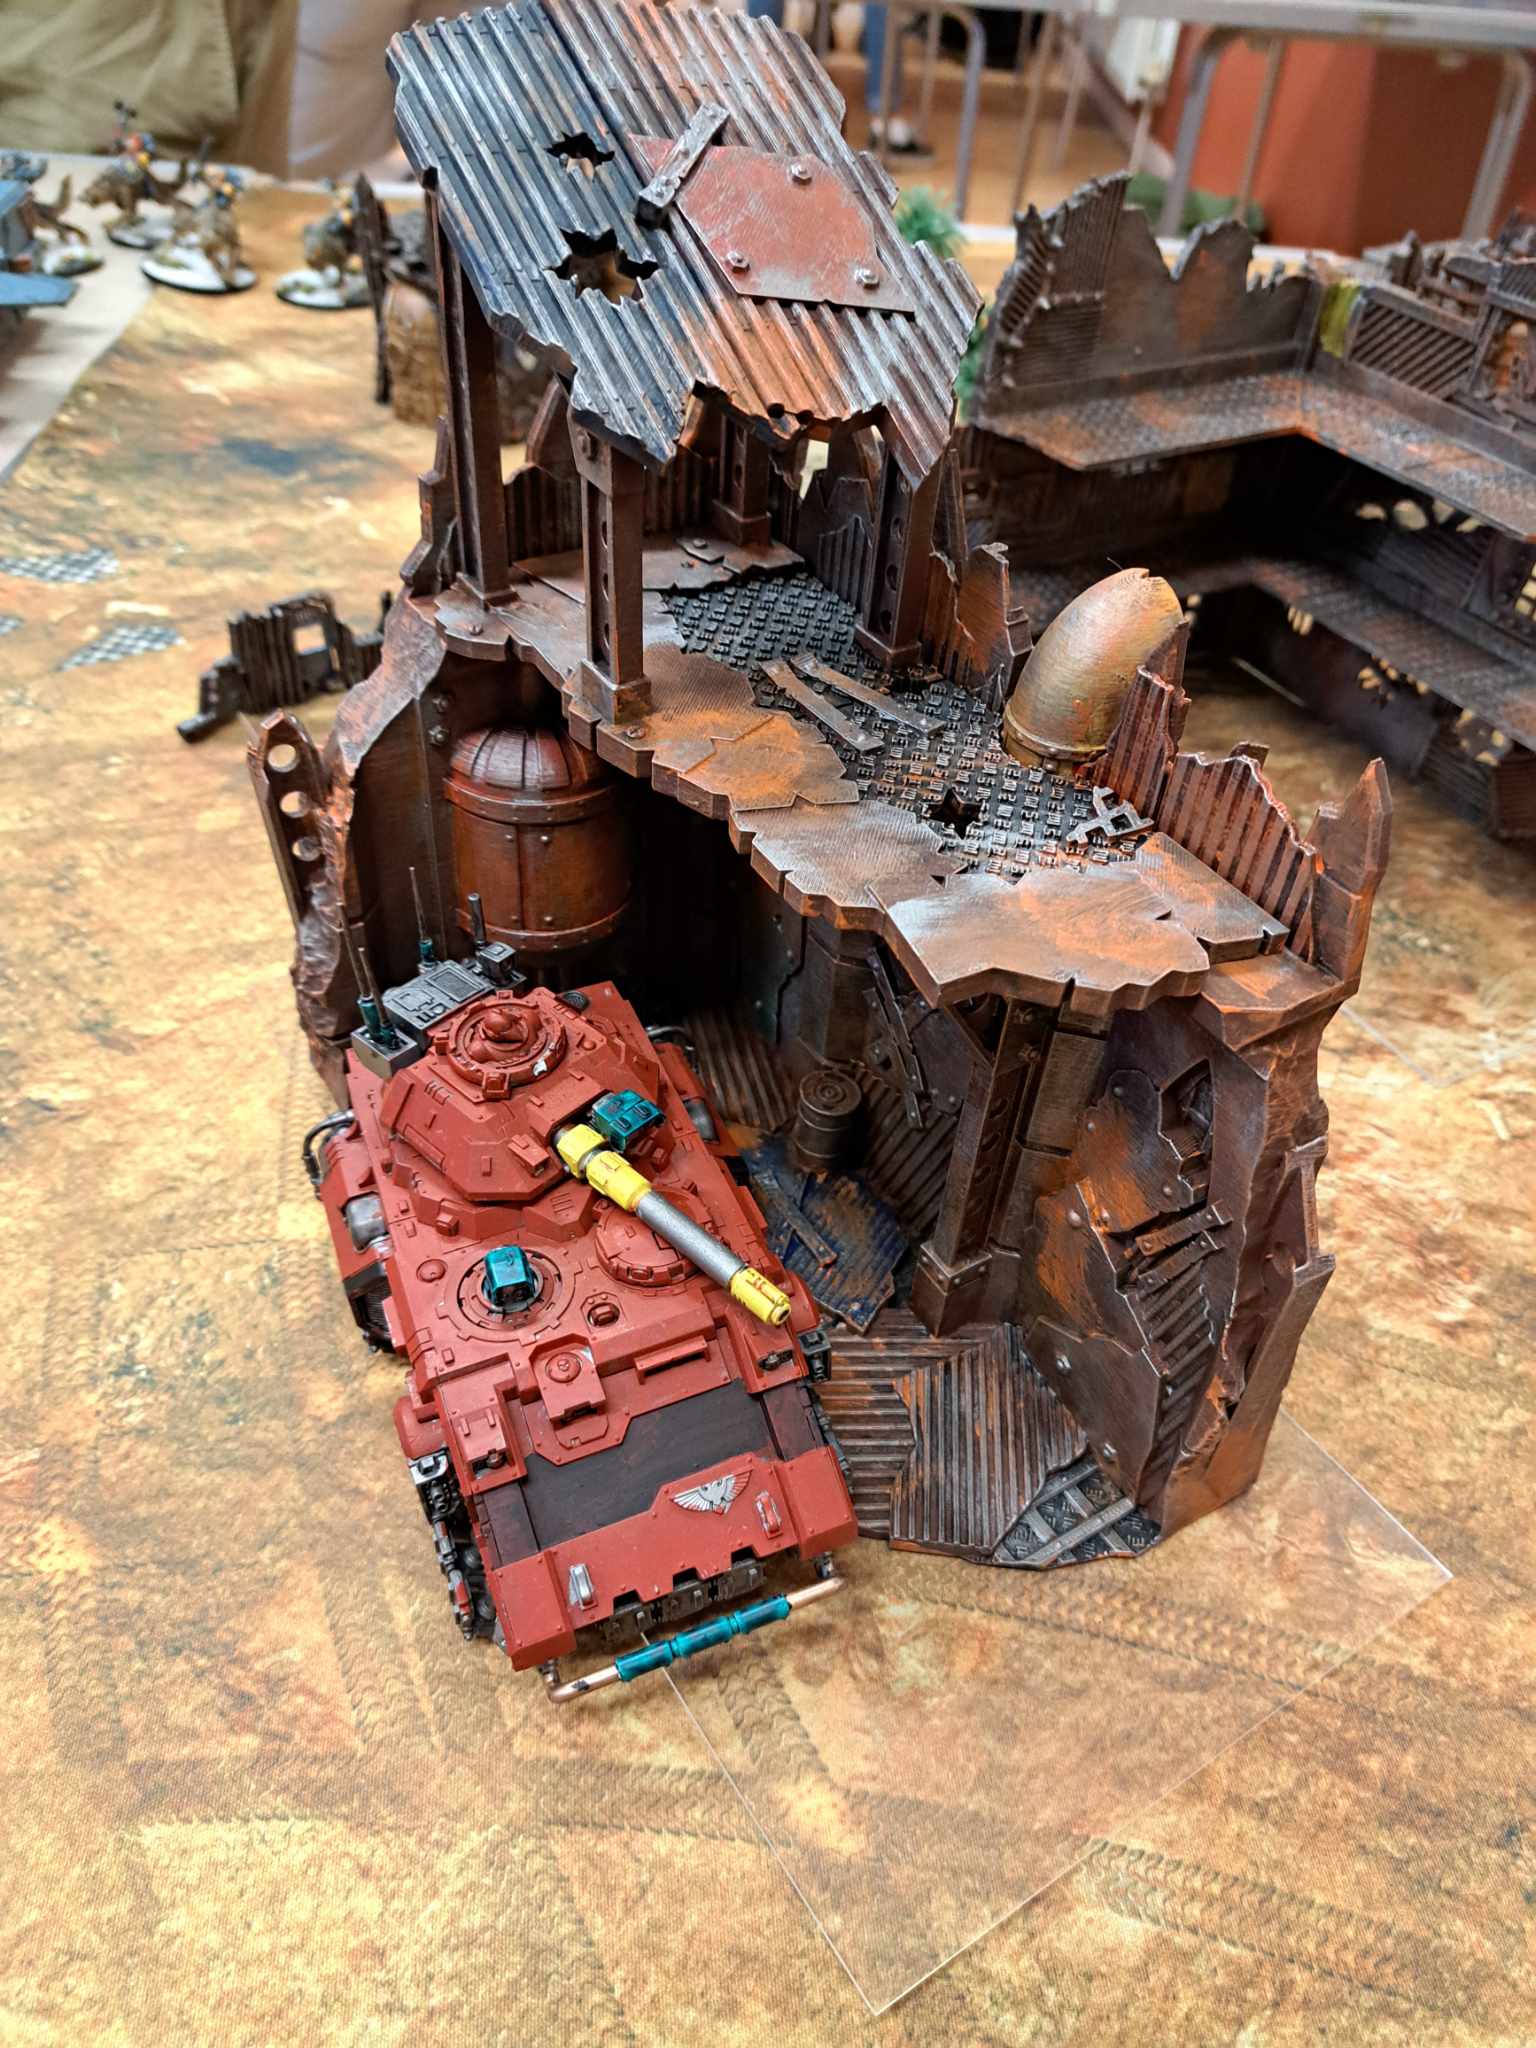 Looking for Ork terrain for warhammer to print. I have the GW